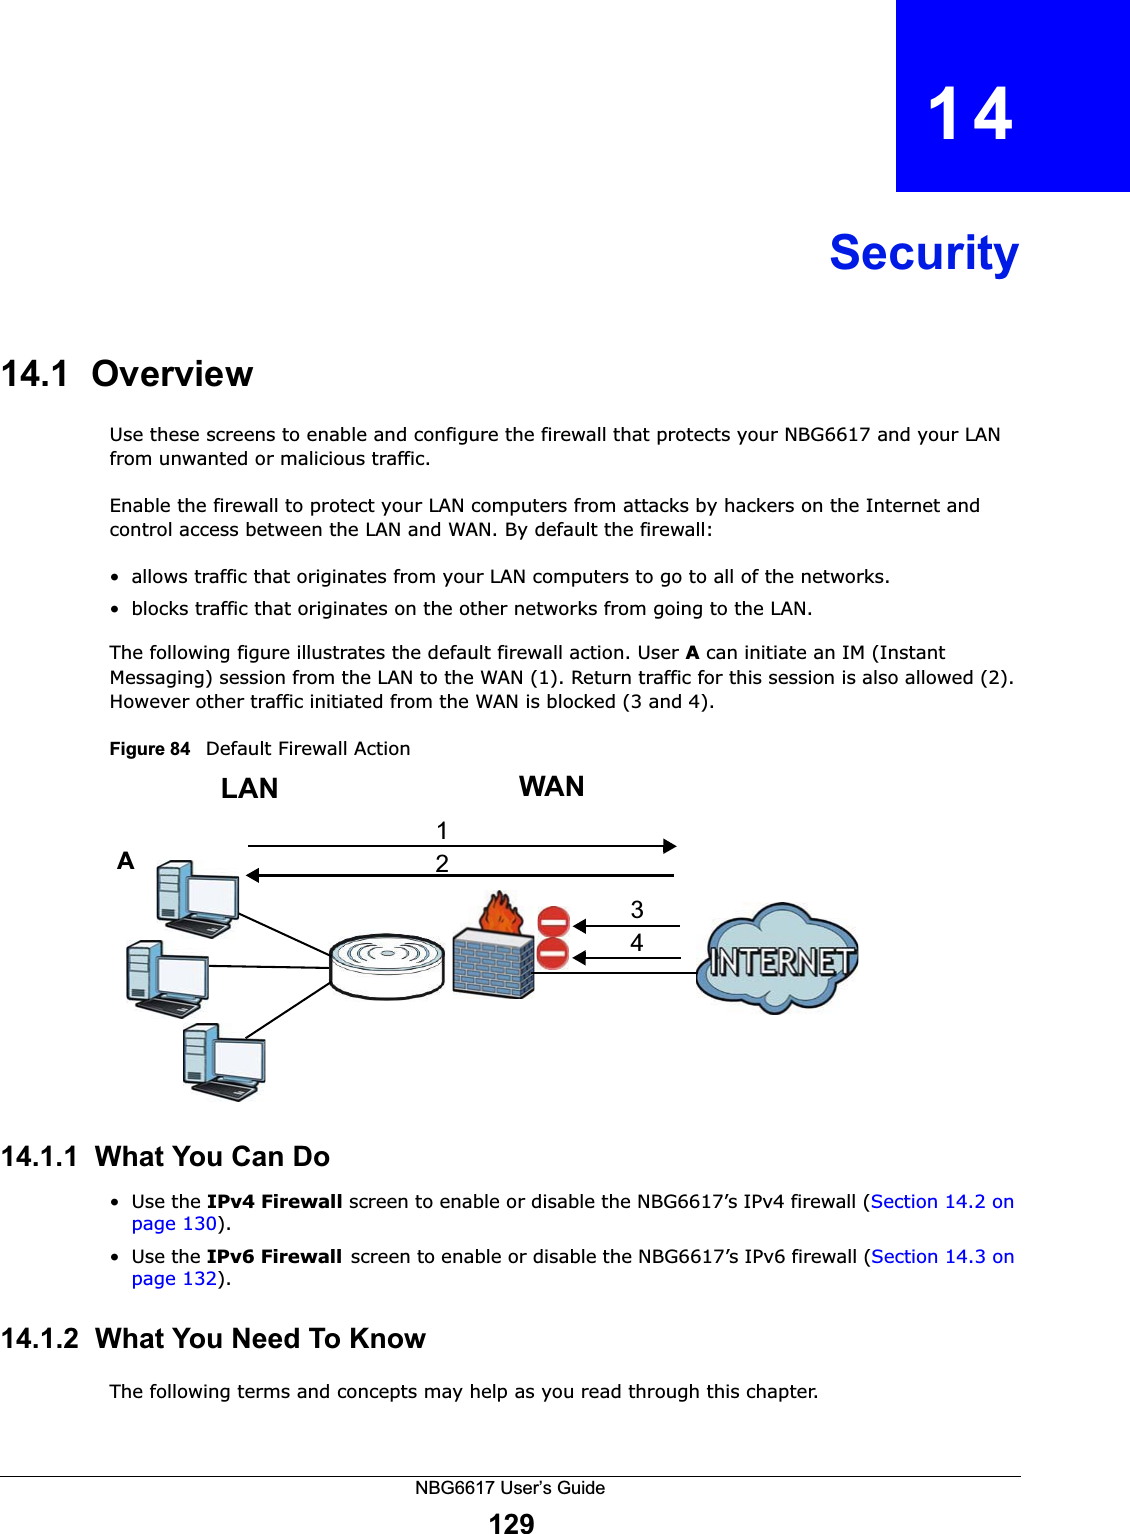 NBG6617 User’s Guide129CHAPTER   14Security14.1  Overview   Use these screens to enable and configure the firewall that protects your NBG6617 and your LAN from unwanted or malicious traffic.Enable the firewall to protect your LAN computers from attacks by hackers on the Internet and control access between the LAN and WAN. By default the firewall:• allows traffic that originates from your LAN computers to go to all of the networks. • blocks traffic that originates on the other networks from going to the LAN. The following figure illustrates the default firewall action. User A can initiate an IM (Instant Messaging) session from the LAN to the WAN (1). Return traffic for this session is also allowed (2). However other traffic initiated from the WAN is blocked (3 and 4).Figure 84   Default Firewall Action14.1.1  What You Can Do•Use the IPv4 Firewall screen to enable or disable the NBG6617’s IPv4 firewall (Section 14.2 on page 130).•Use the IPv6 Firewallscreen to enable or disable the NBG6617’s IPv6 firewall (Section 14.3 on page 132).14.1.2  What You Need To KnowThe following terms and concepts may help as you read through this chapter.WANLAN3412A